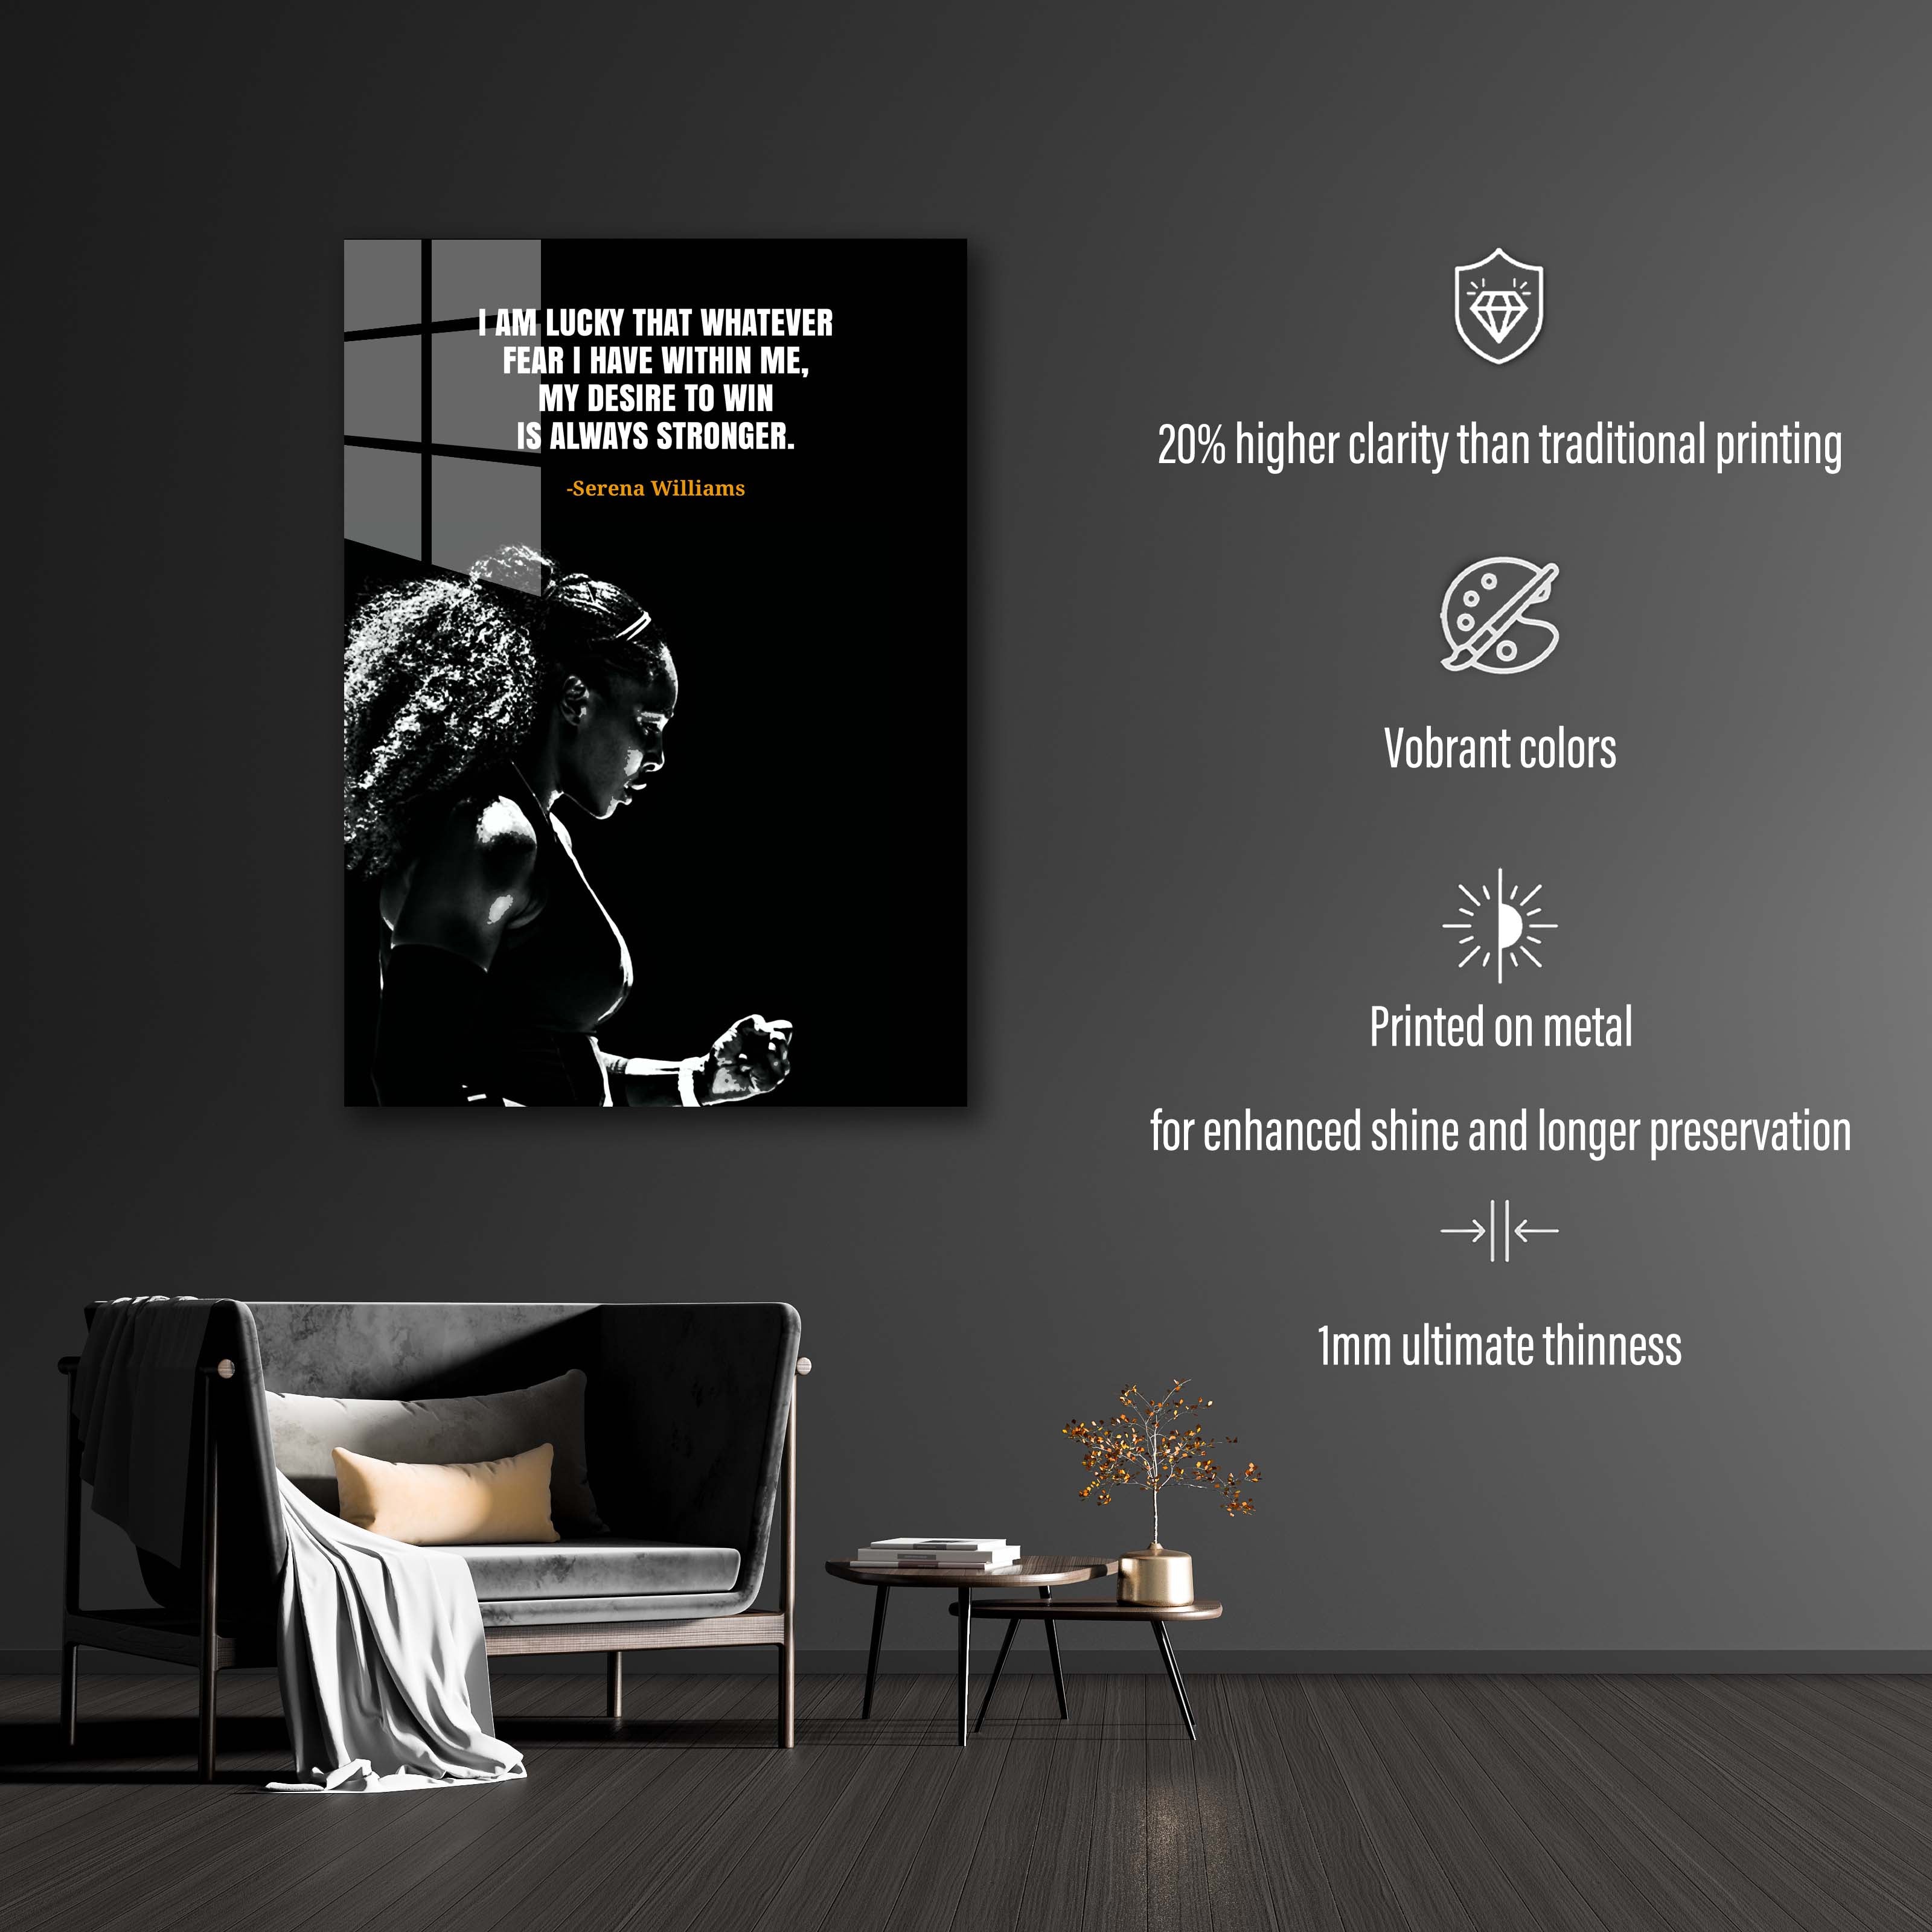 Serena Williams tennis quotes -designed by @Pus Meong art